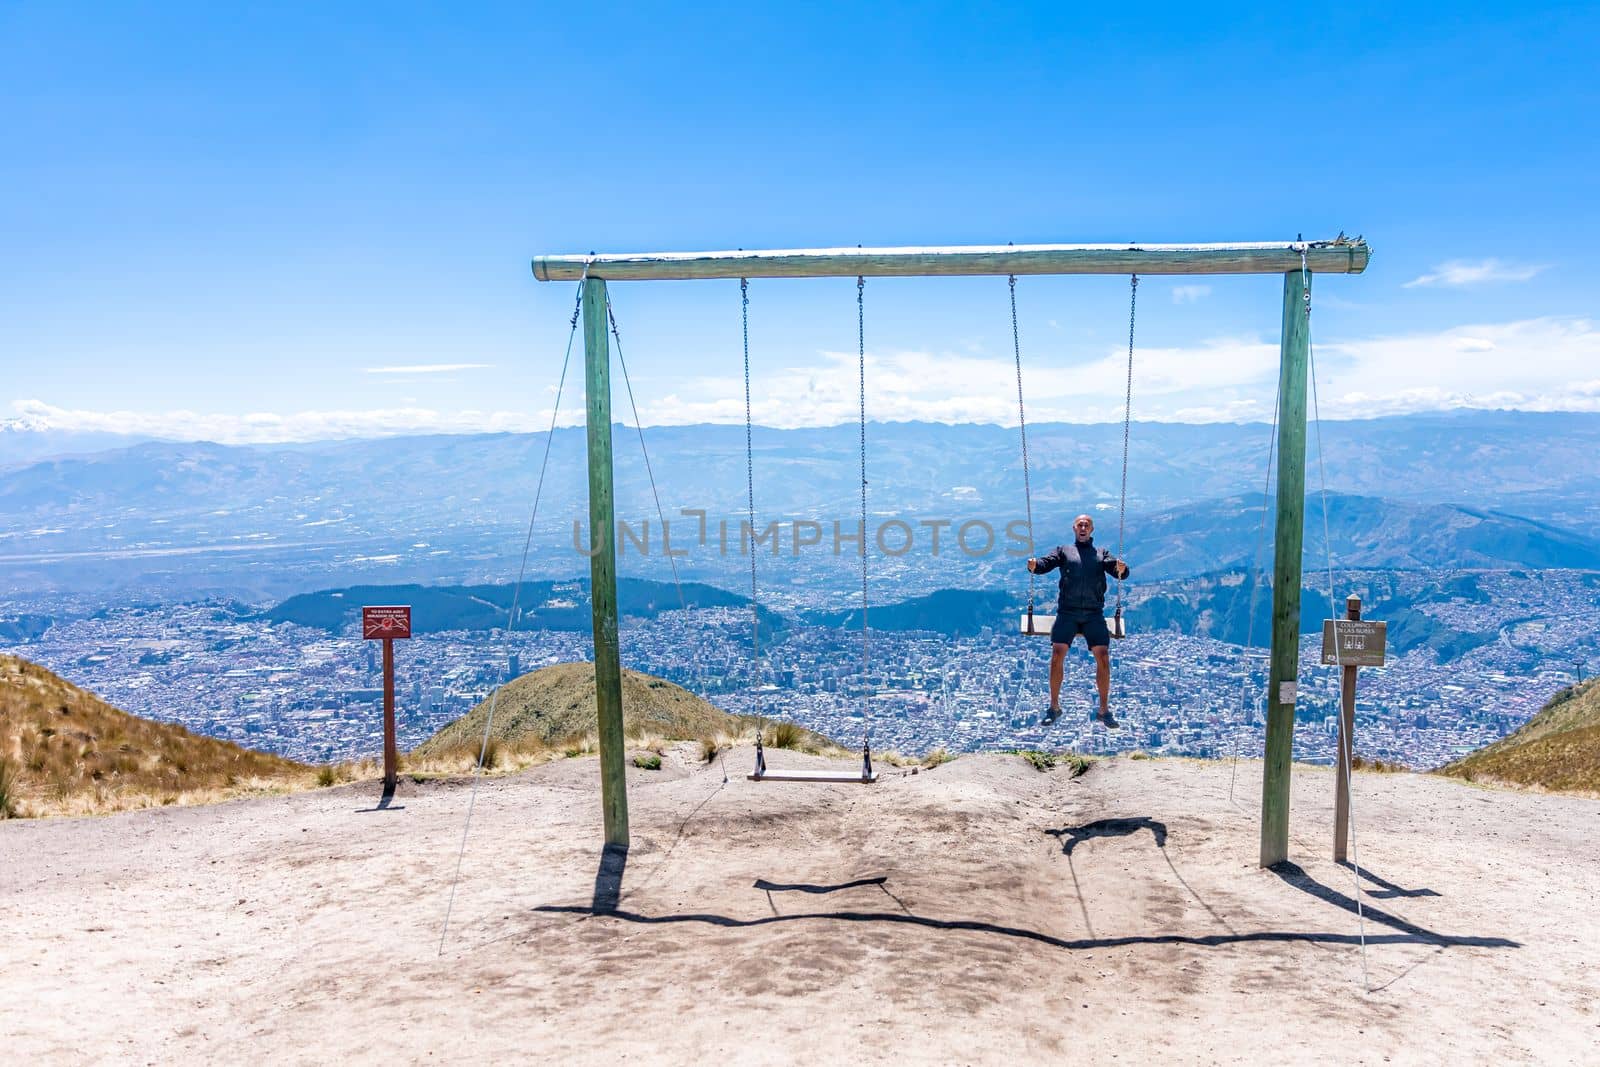 man on a swing at a viewpoint in the mountains by Edophoto